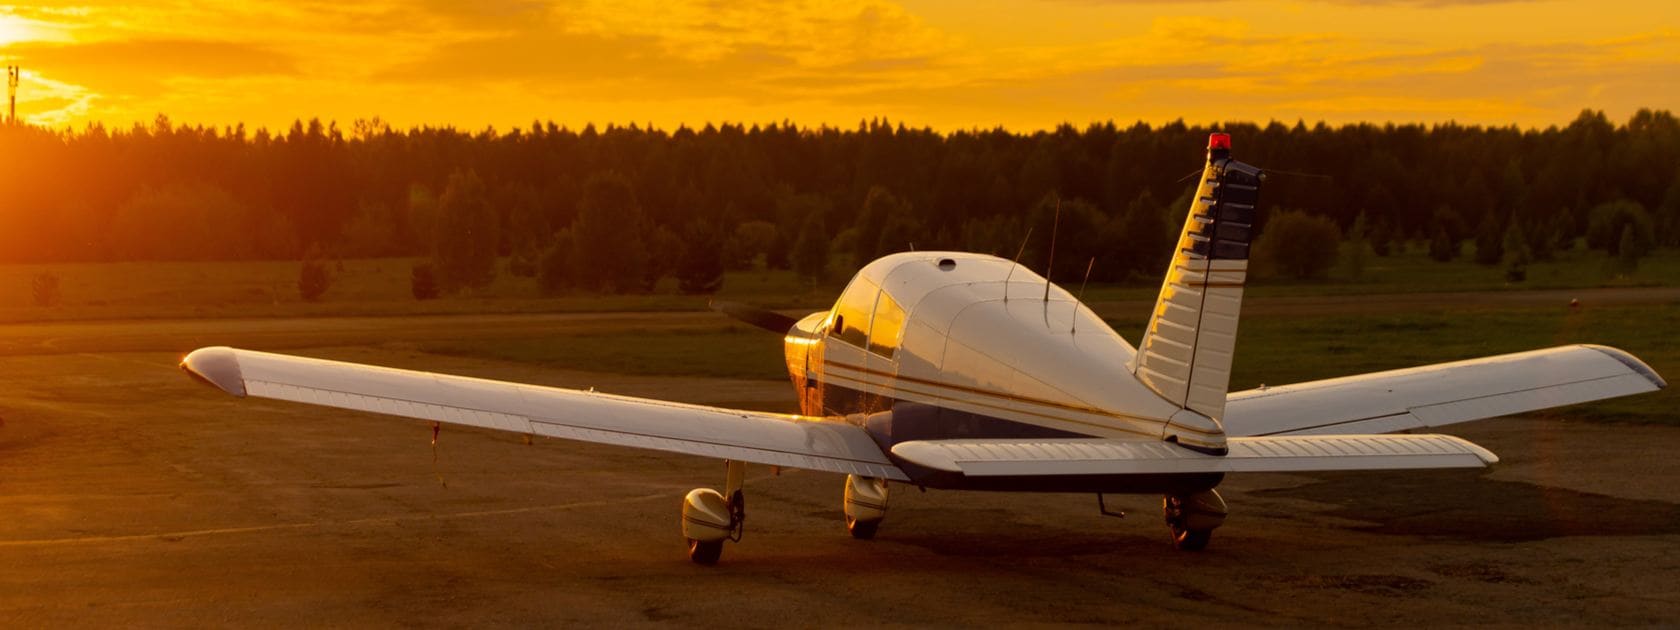 Private jet parked on a runway at sunset, trees in the background.